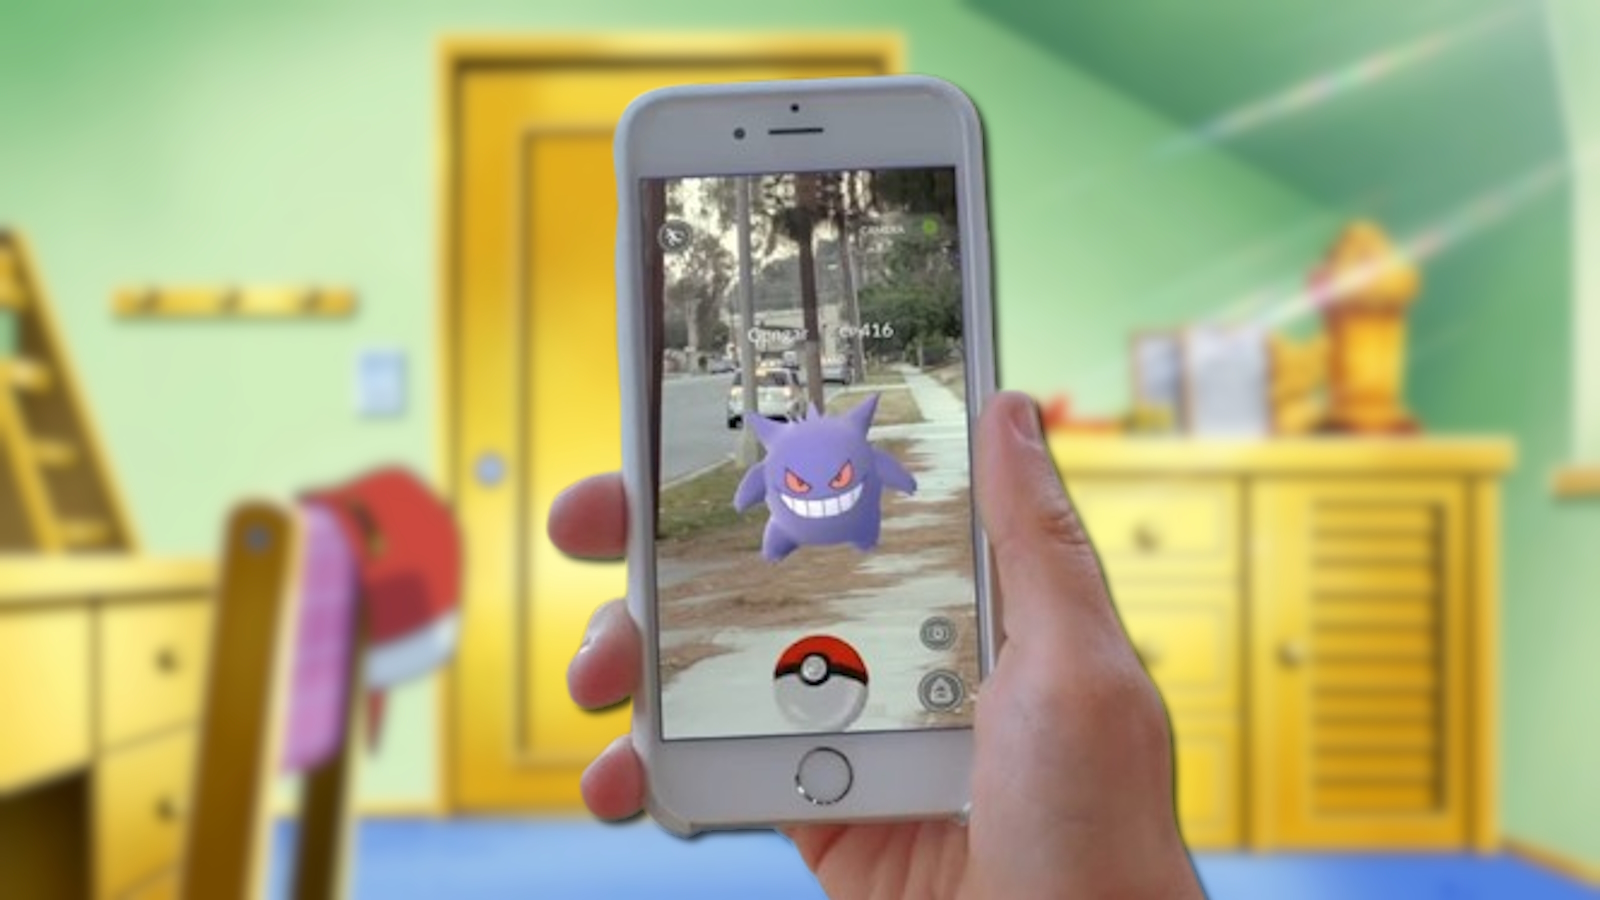 Pokemon Go players convinced Niantic is trying to make them spoof